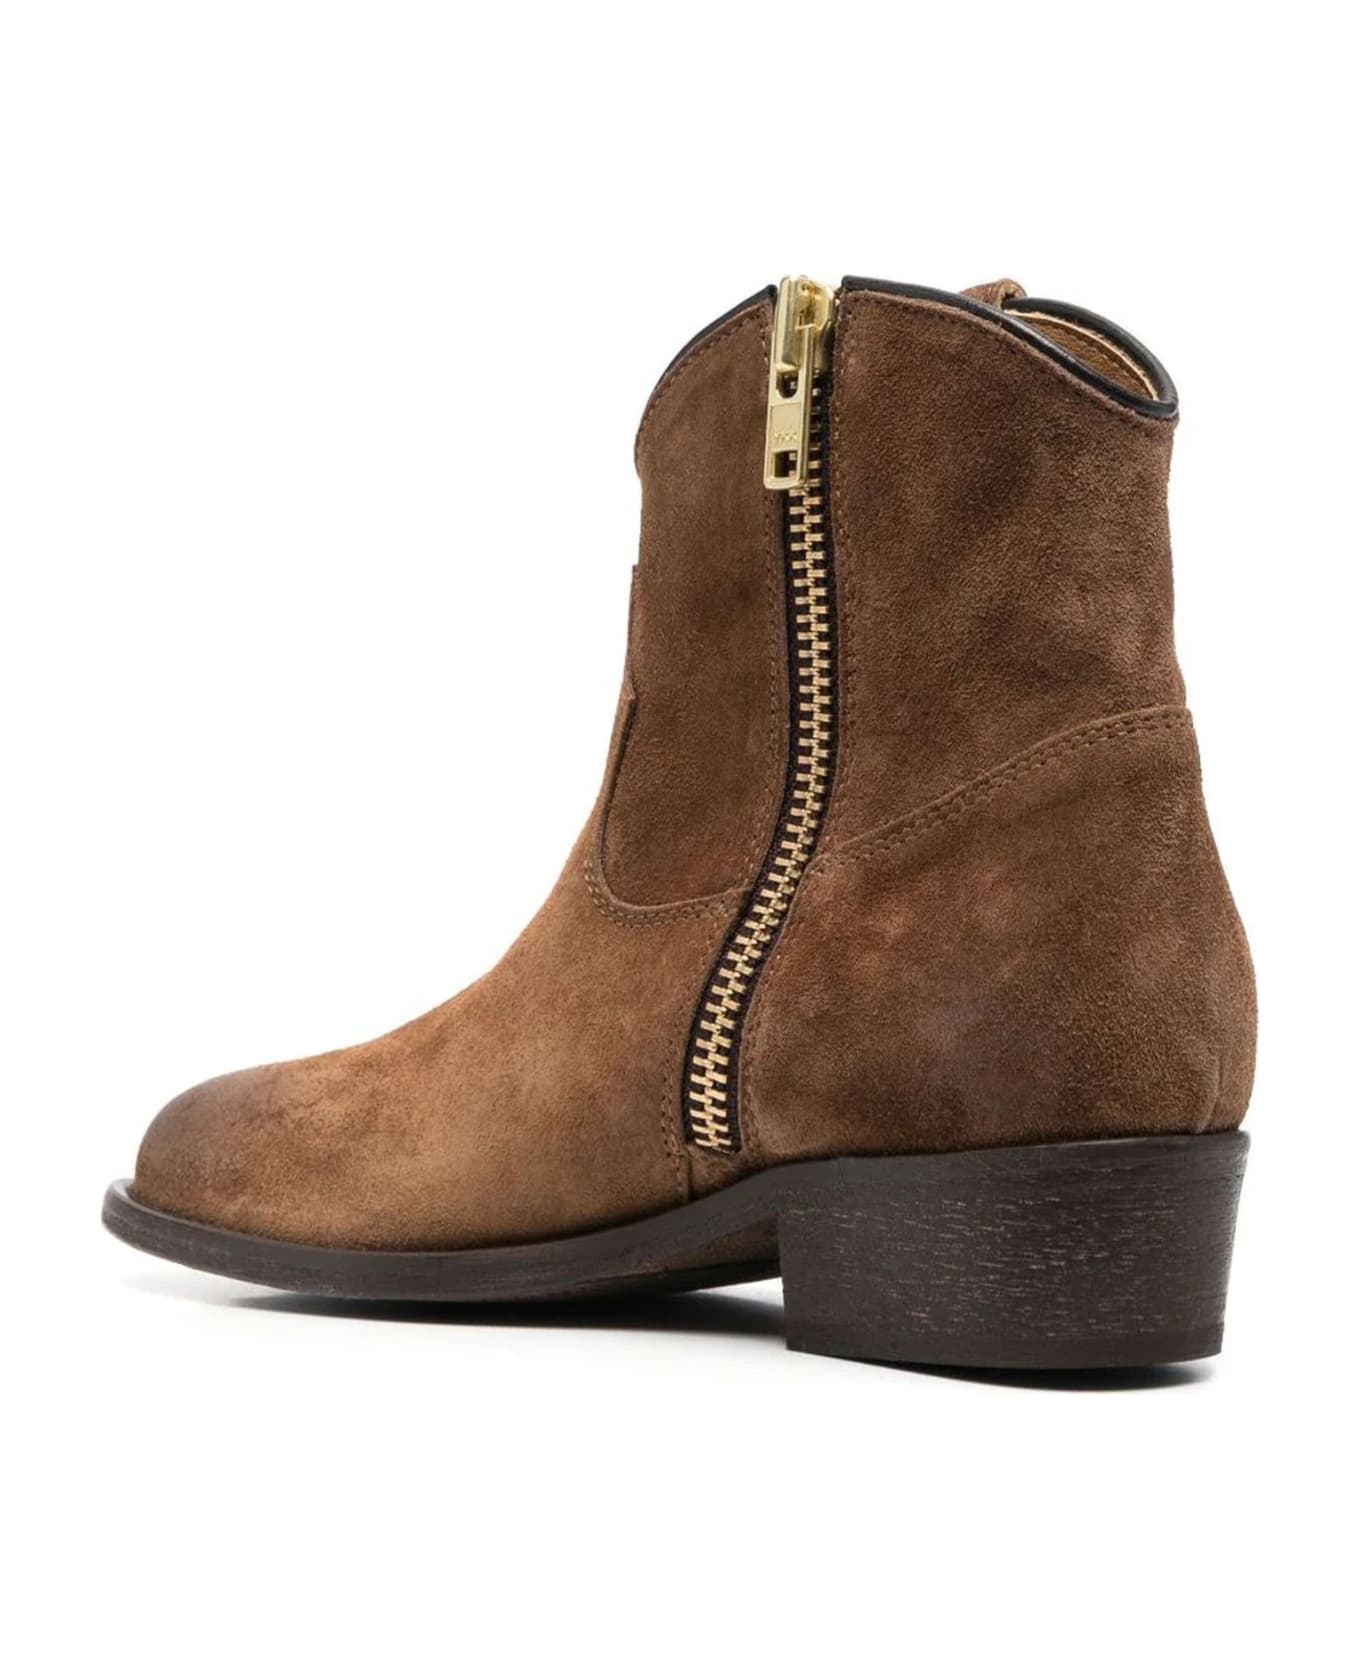 Via Roma 15 Brown Calf Suede Ankle Boots - Brown